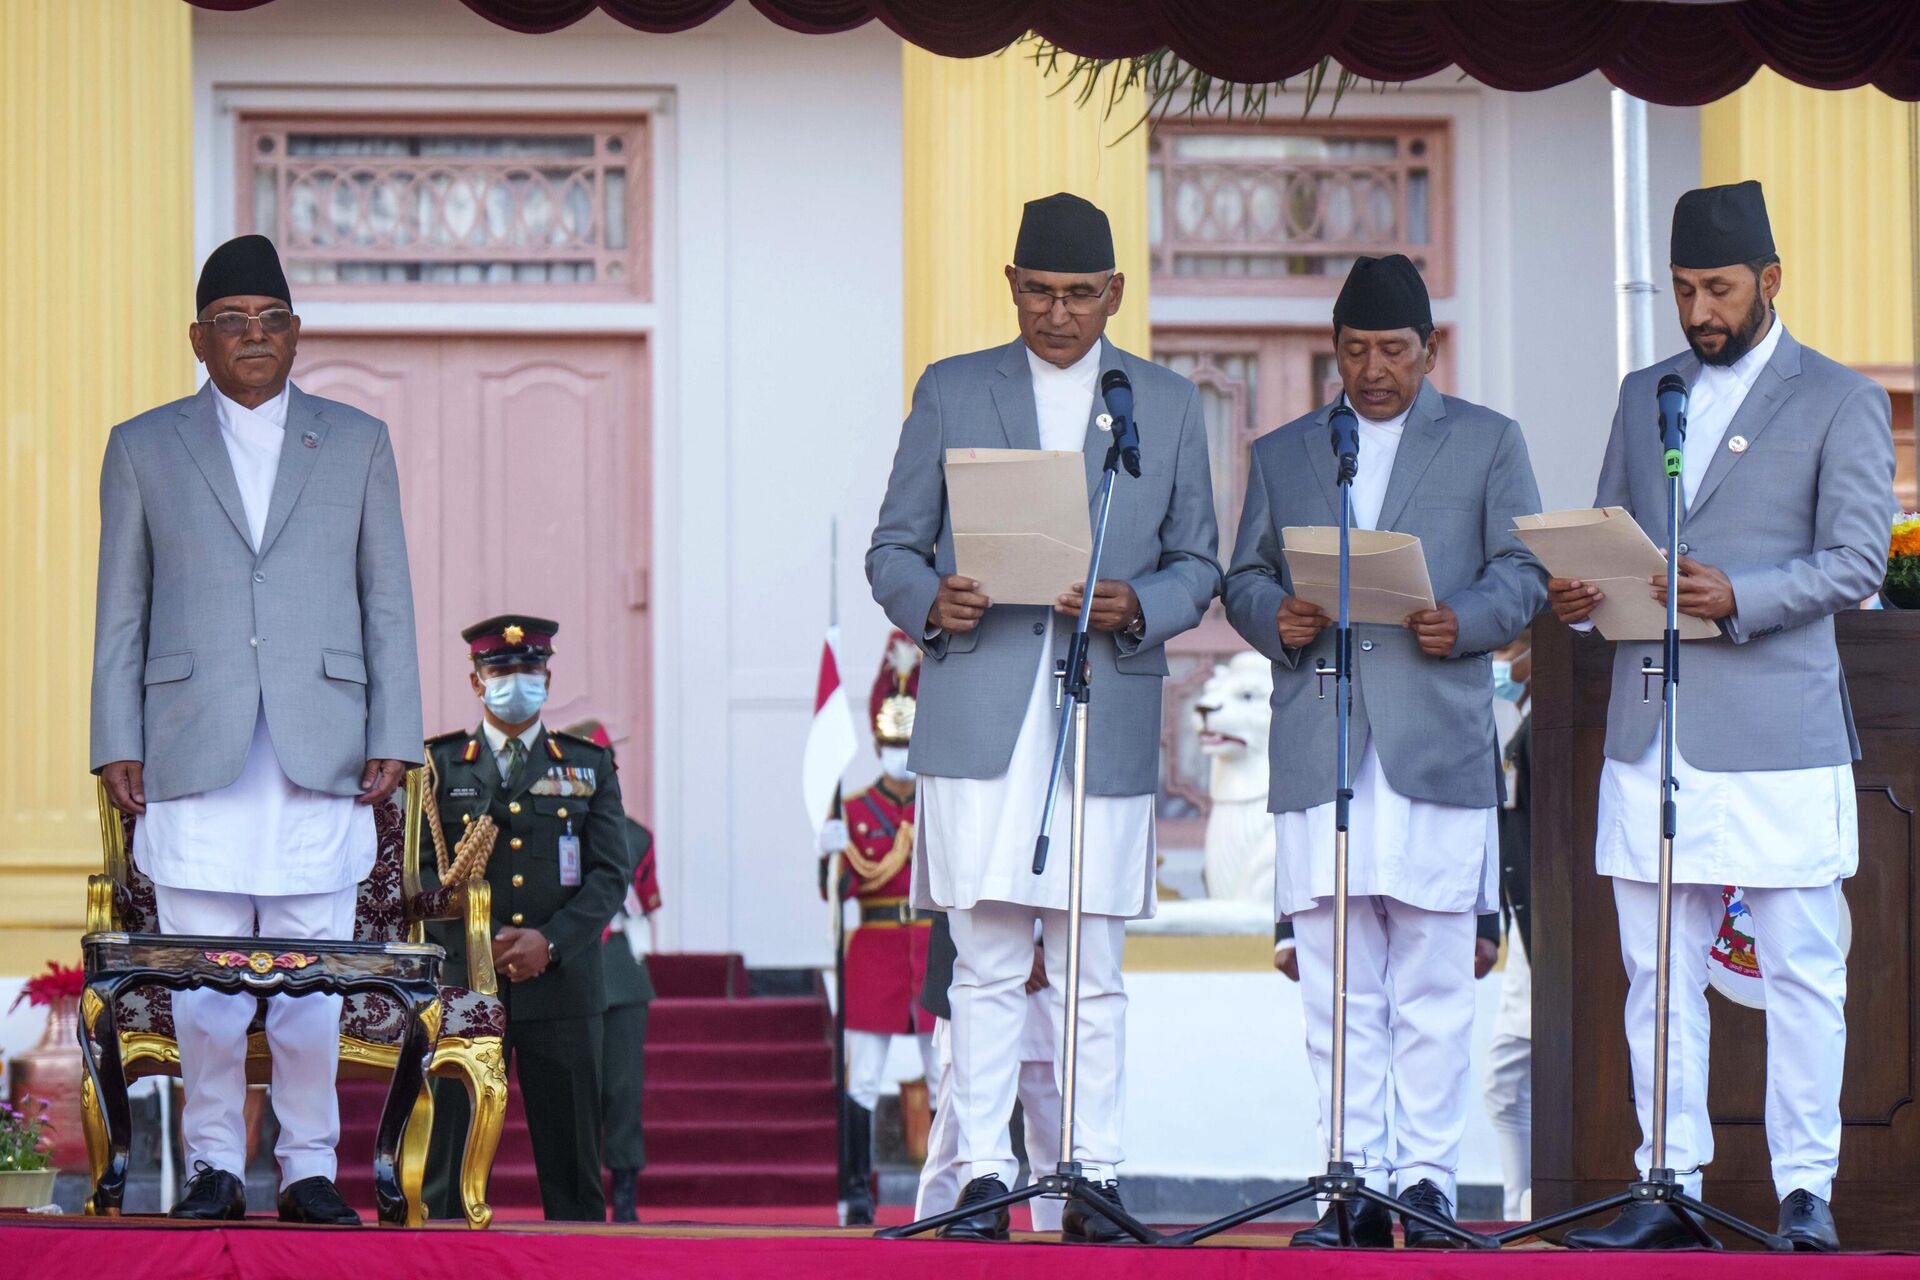 Nepal's newly appointed prime minister Pushpa Kamal Dahal, left, looks on as his deputies, from right, Rabi Lamichhane, Narayan Kaji Shrestha and Bishnu Paudel are being sworn in during a ceremony at the President House during a ceremony in Kathmandu, Nepal, Monday, Dec. 26, 2022. - Sputnik India, 1920, 28.01.2023